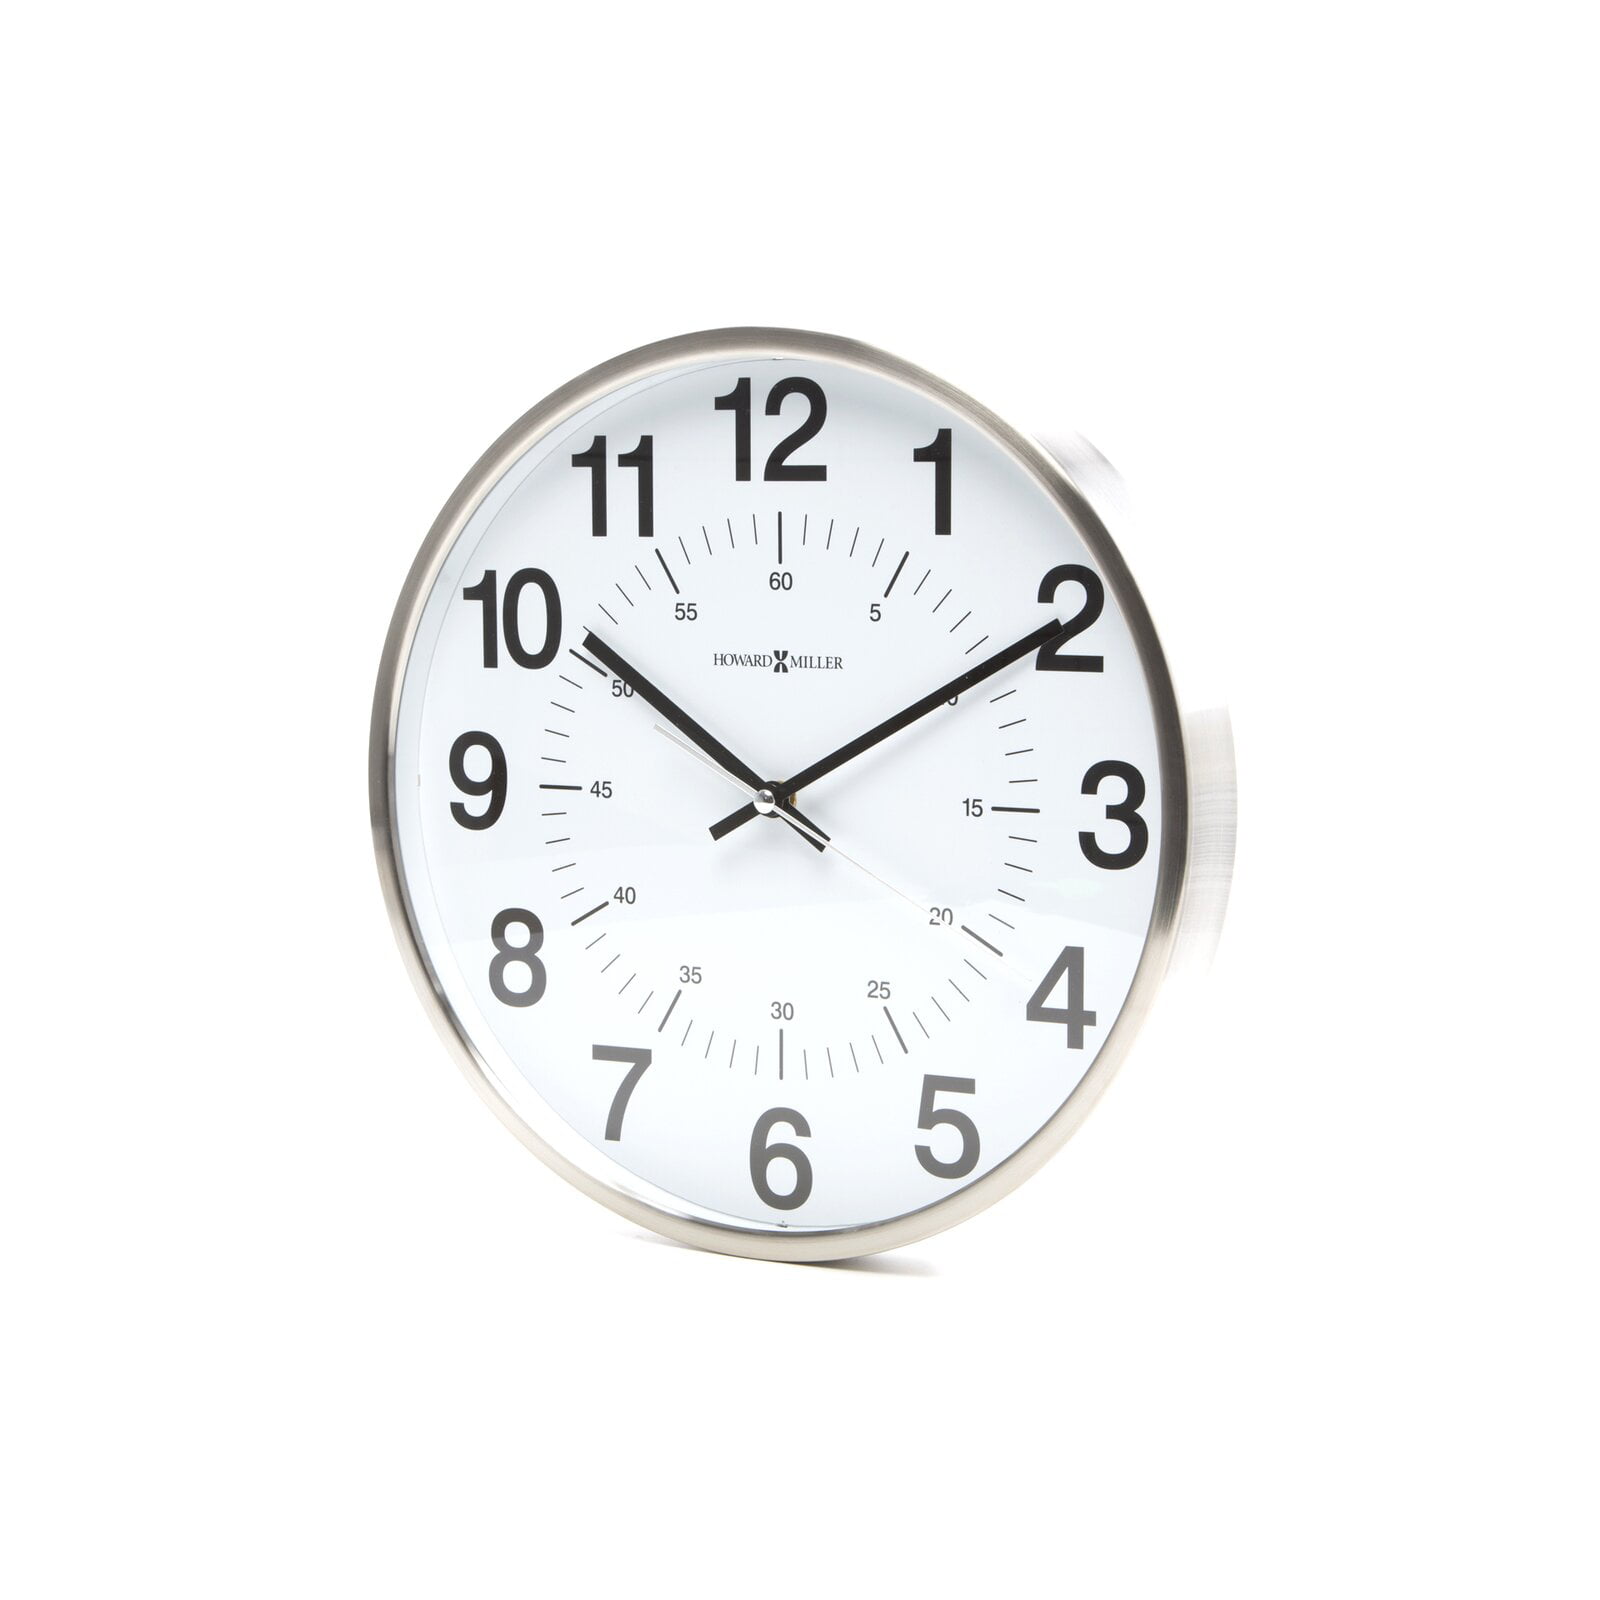 Vogue Kitchen Time Wall Analogue Clock in White Made of Plastic Quartz Movement 